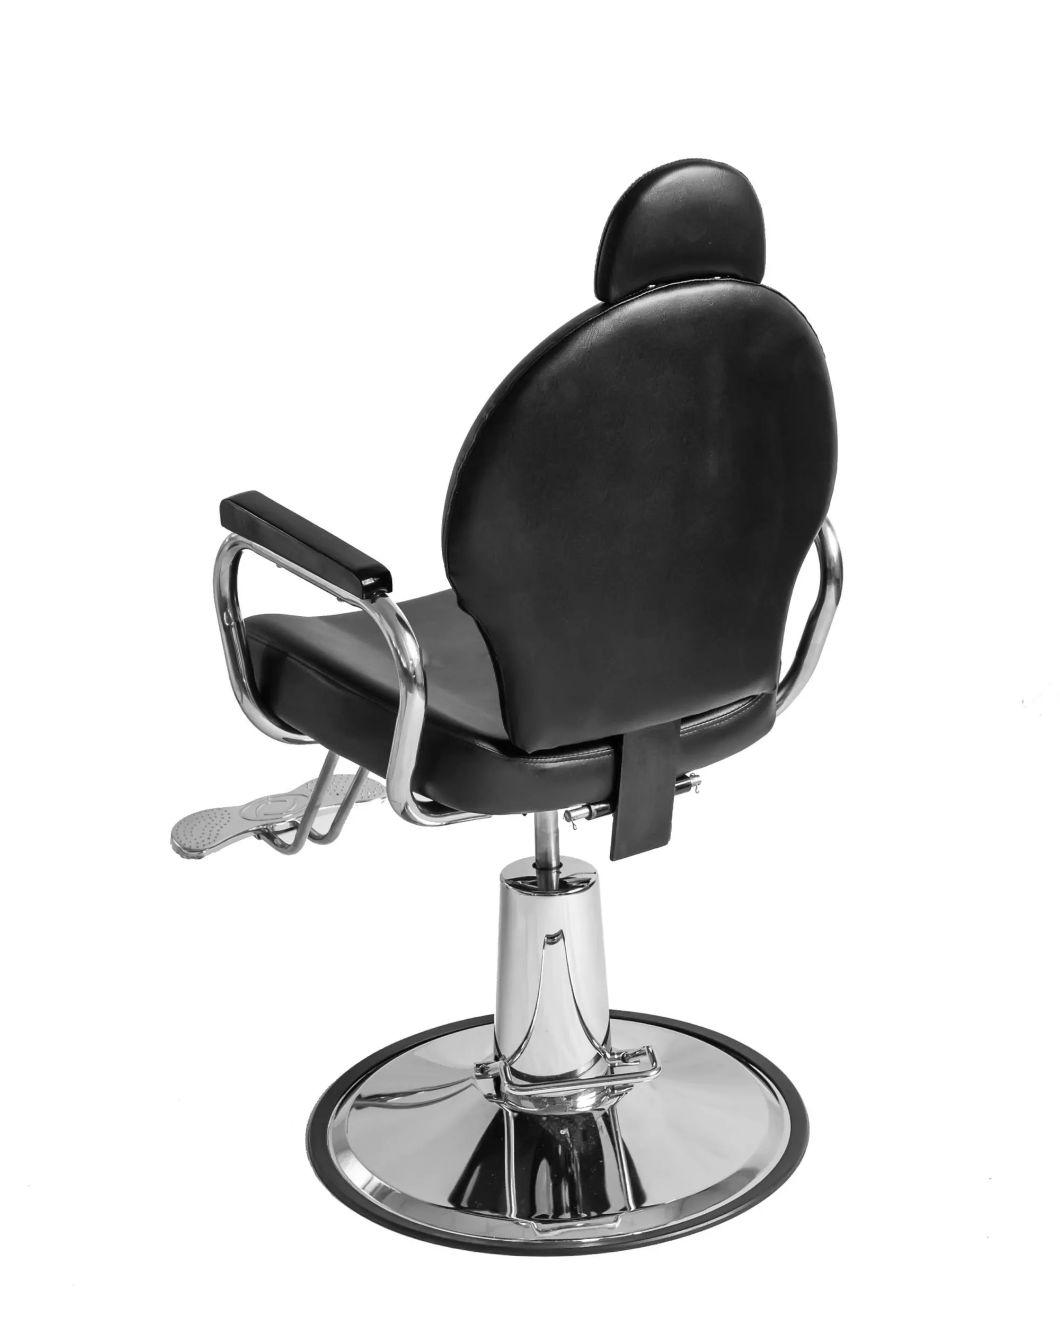 Hl- 1094 Make up Chair for Man or Woman with Stainless Steel Armrest and Aluminum Pedal